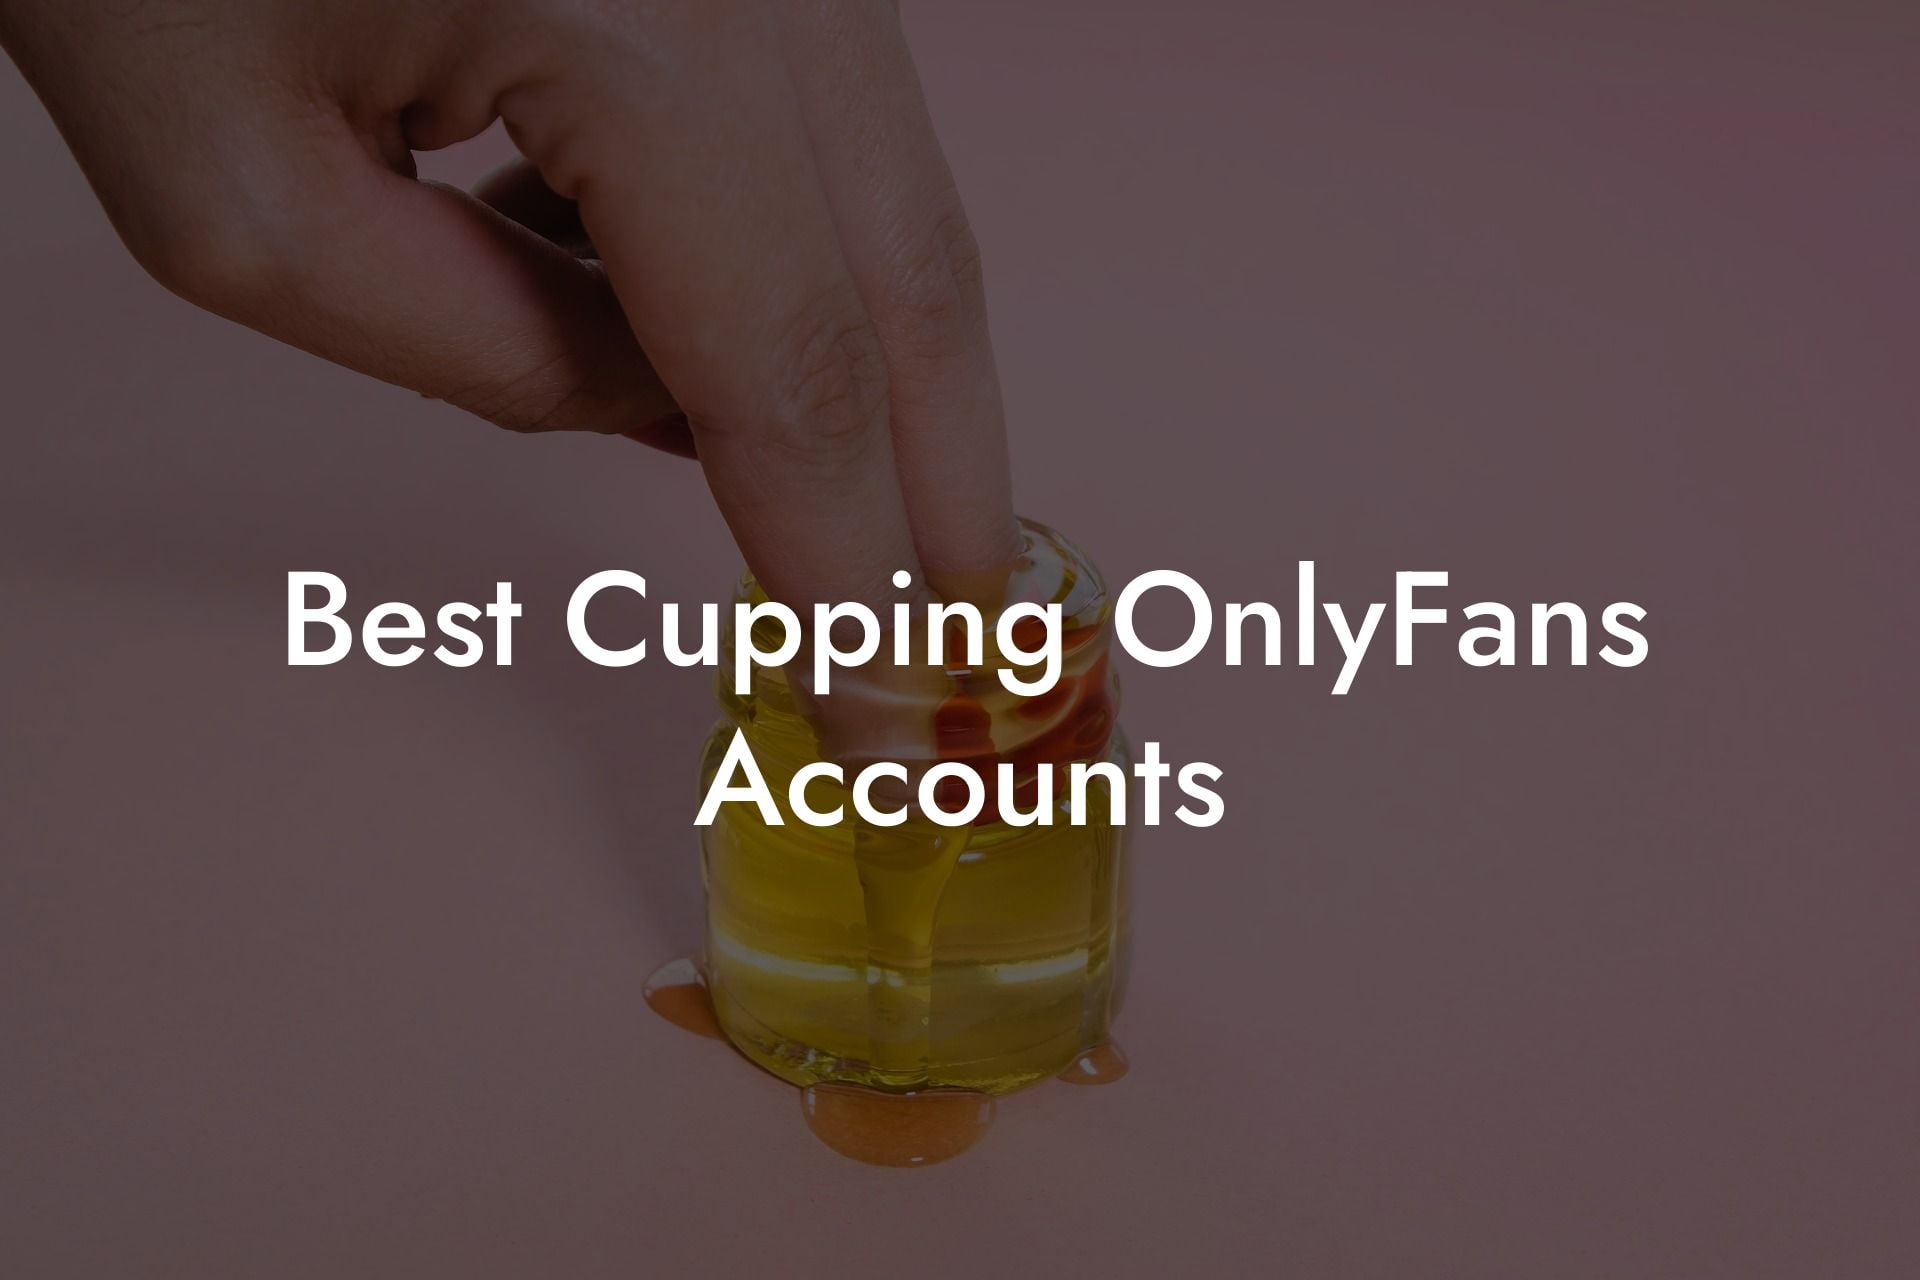 Best Cupping OnlyFans Accounts